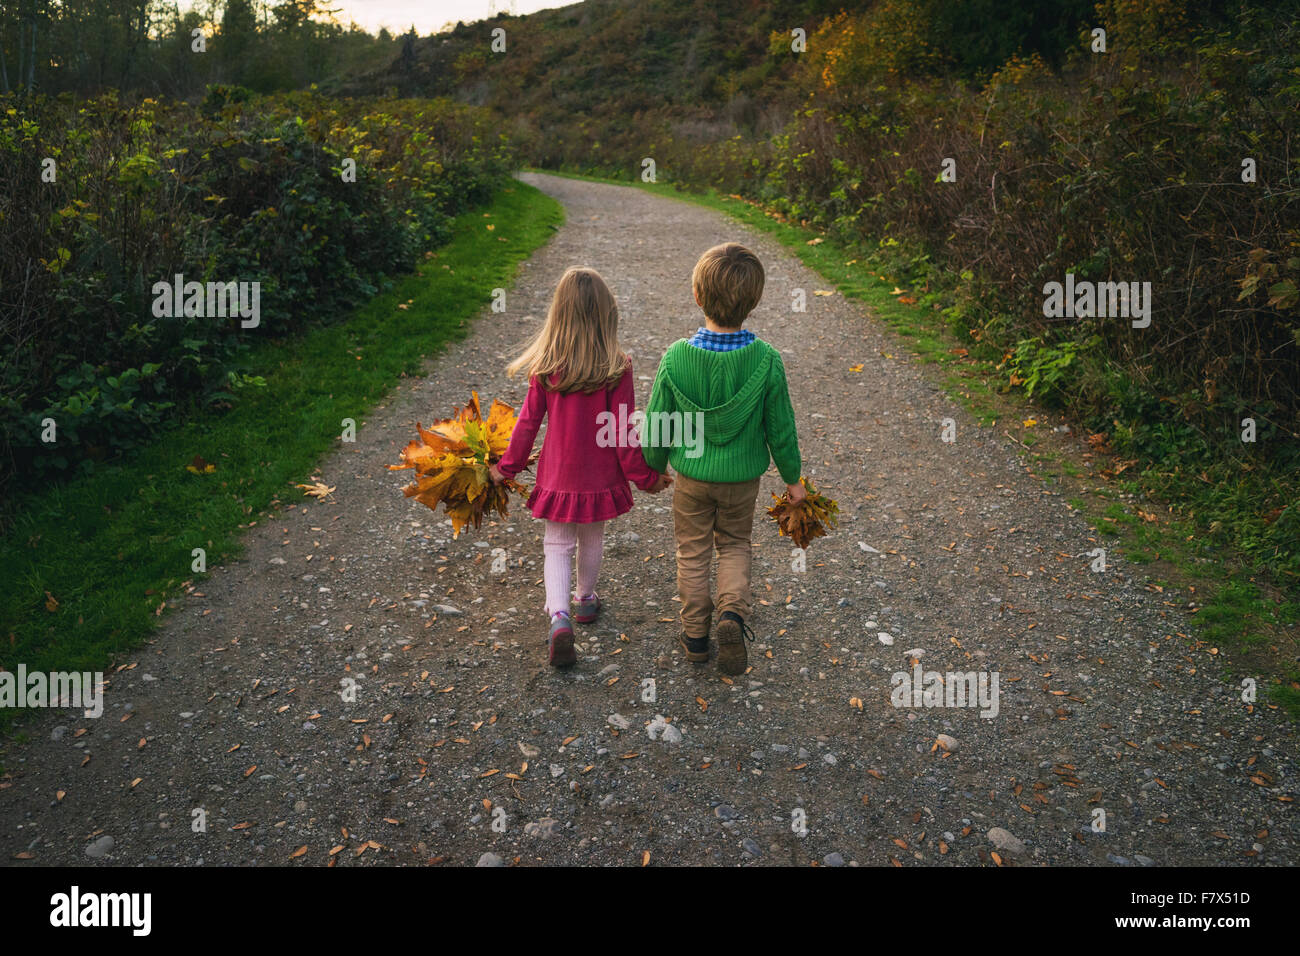 Boy and girl walking down path holding hands, carrying autumn leaves Stock Photo